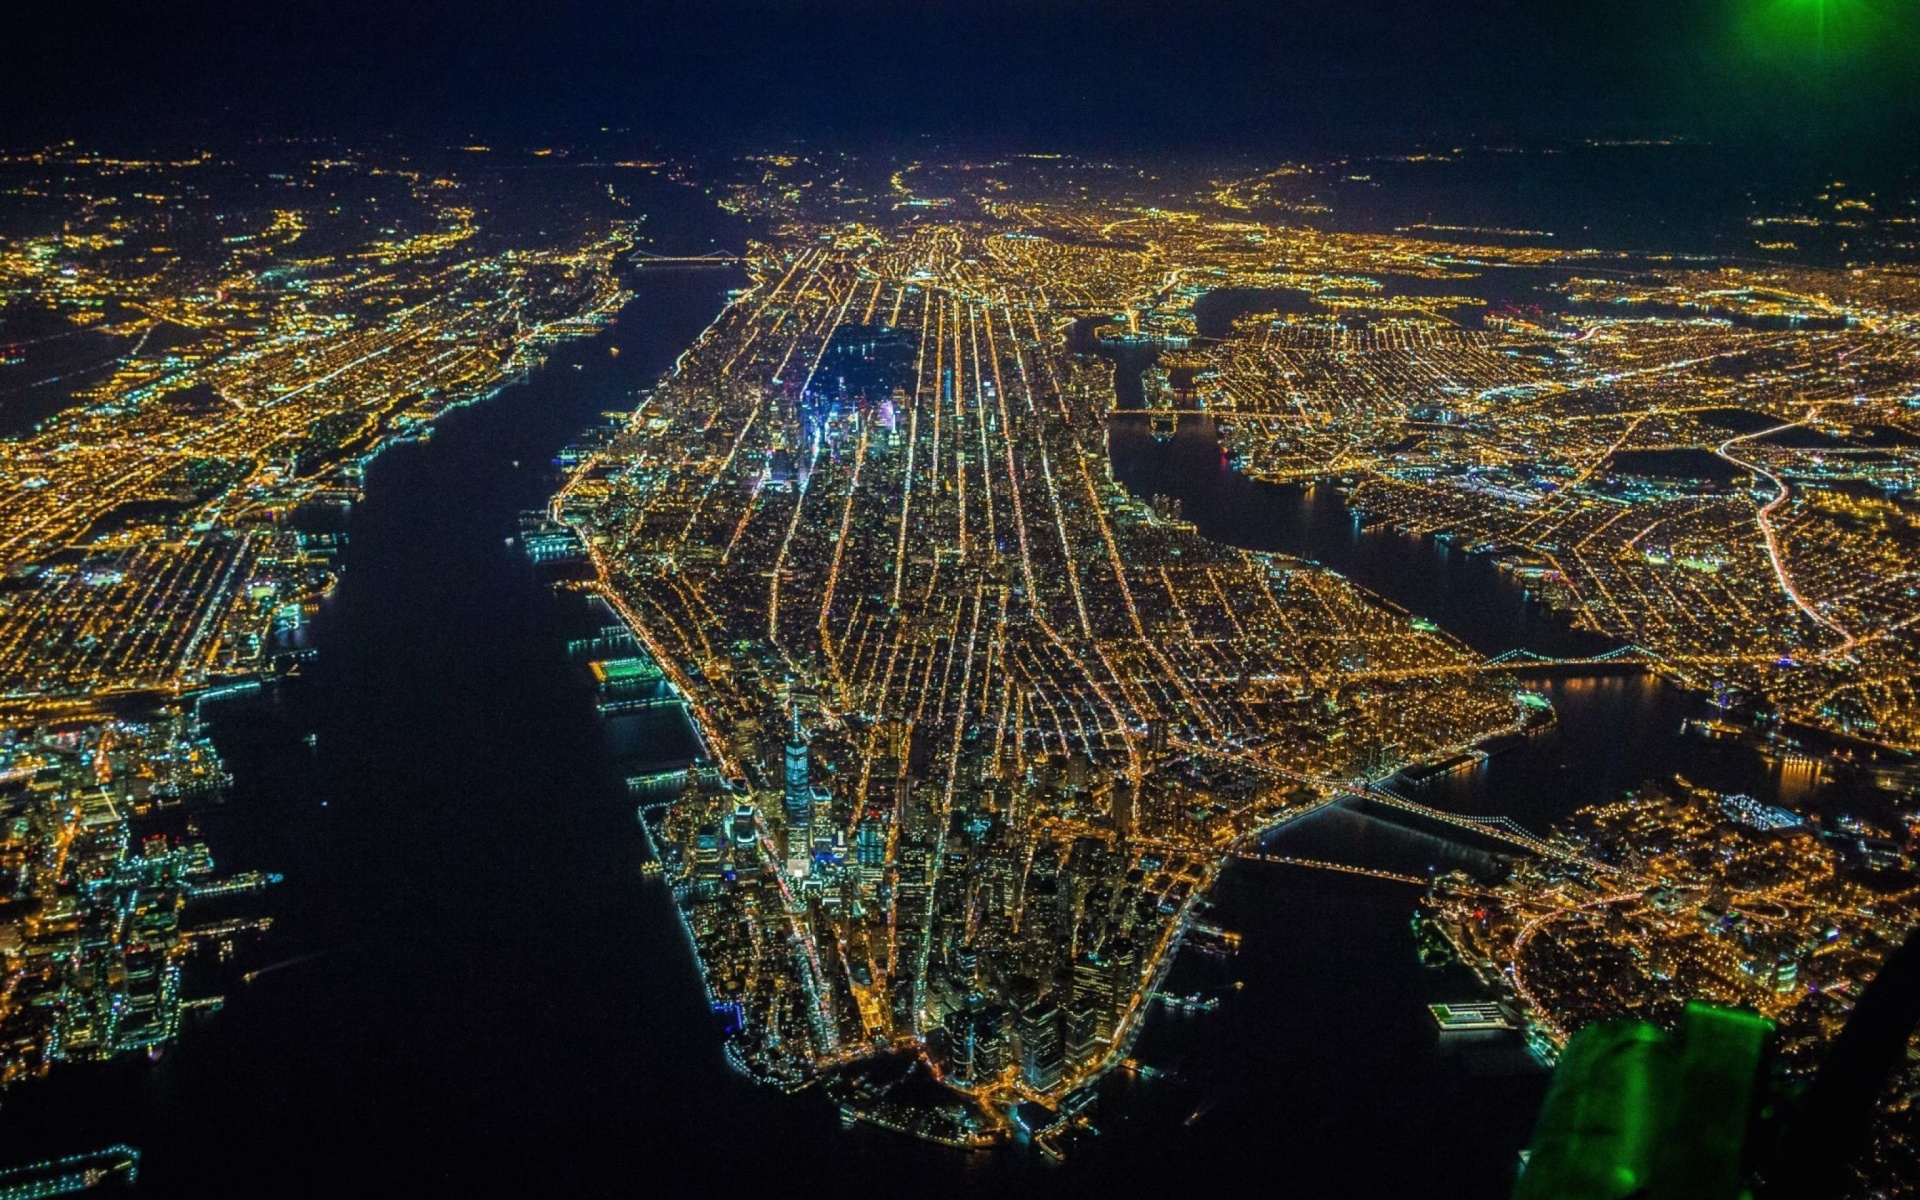 New York City Night View From Space wallpaper 1920x1200